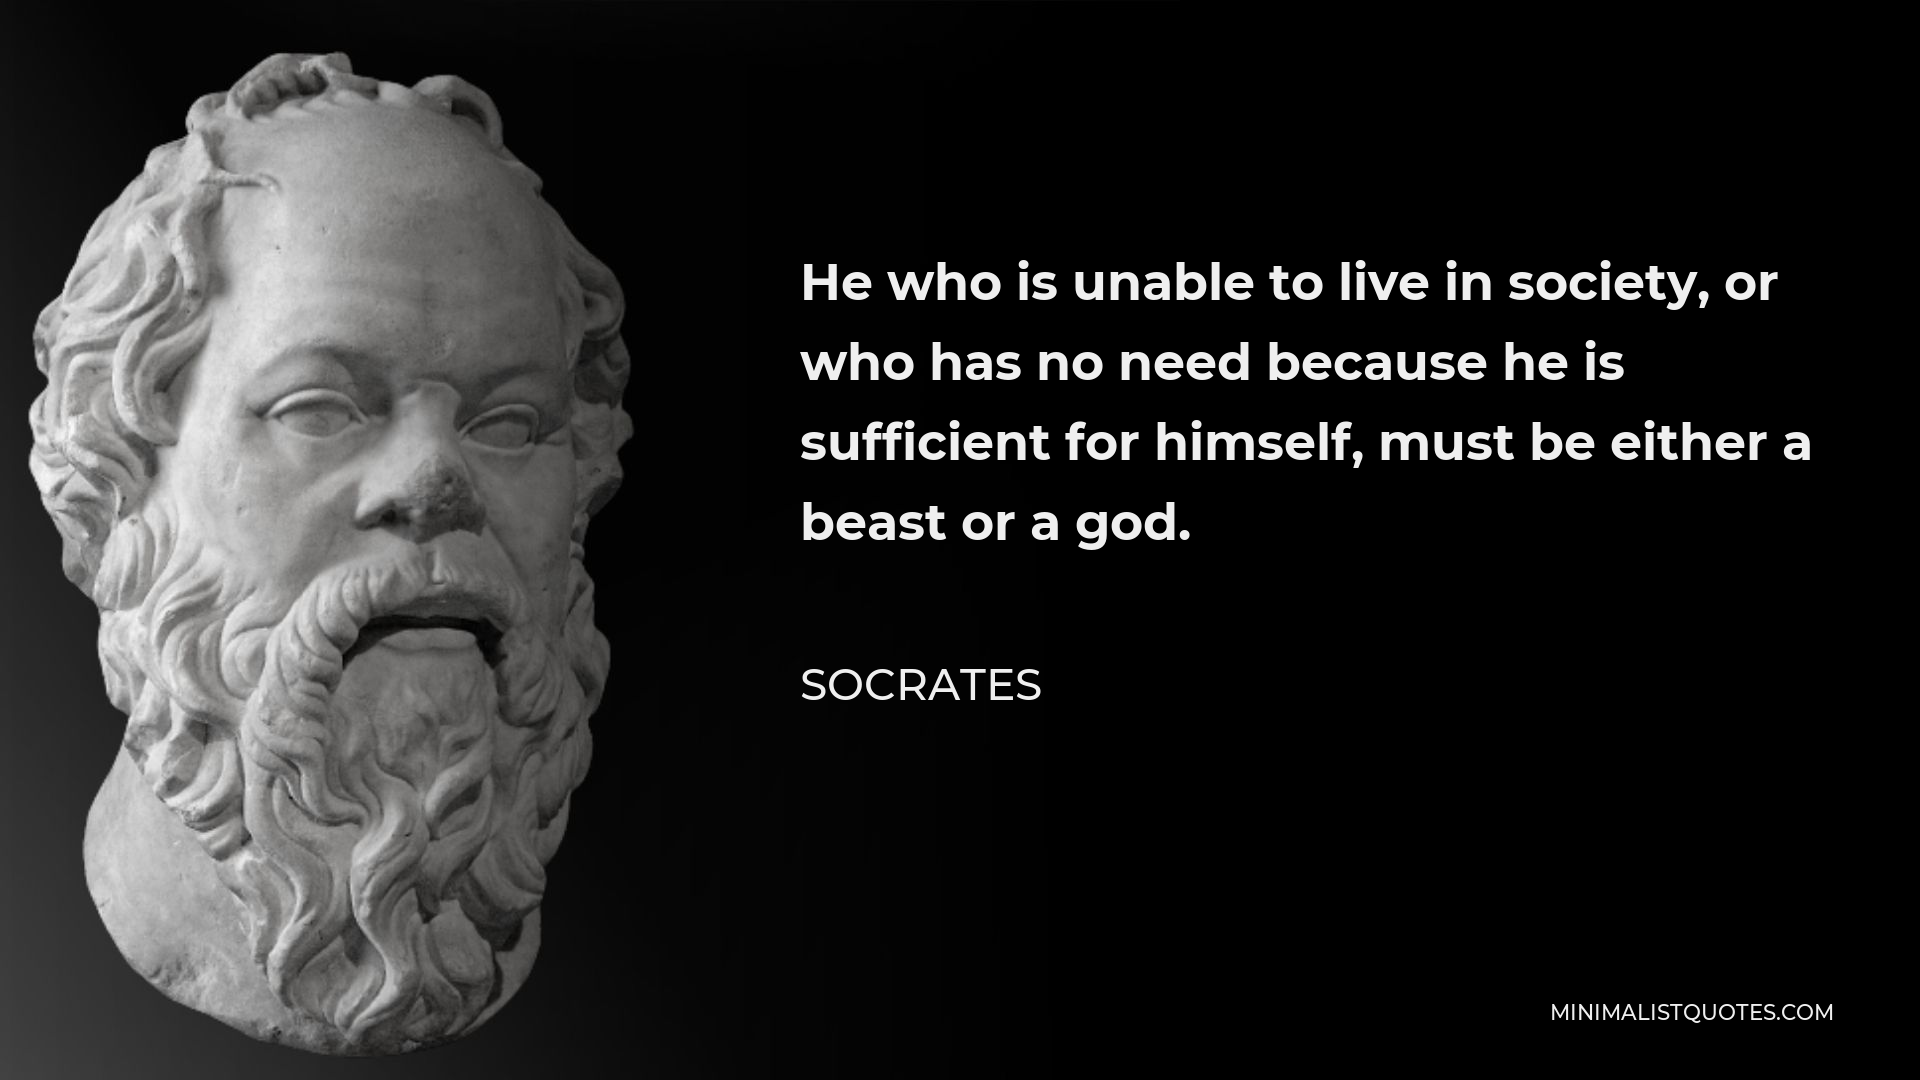 Socrates Quote - He who is unable to live in society, or who has no need because he is sufficient for himself, must be either a beast or a god.